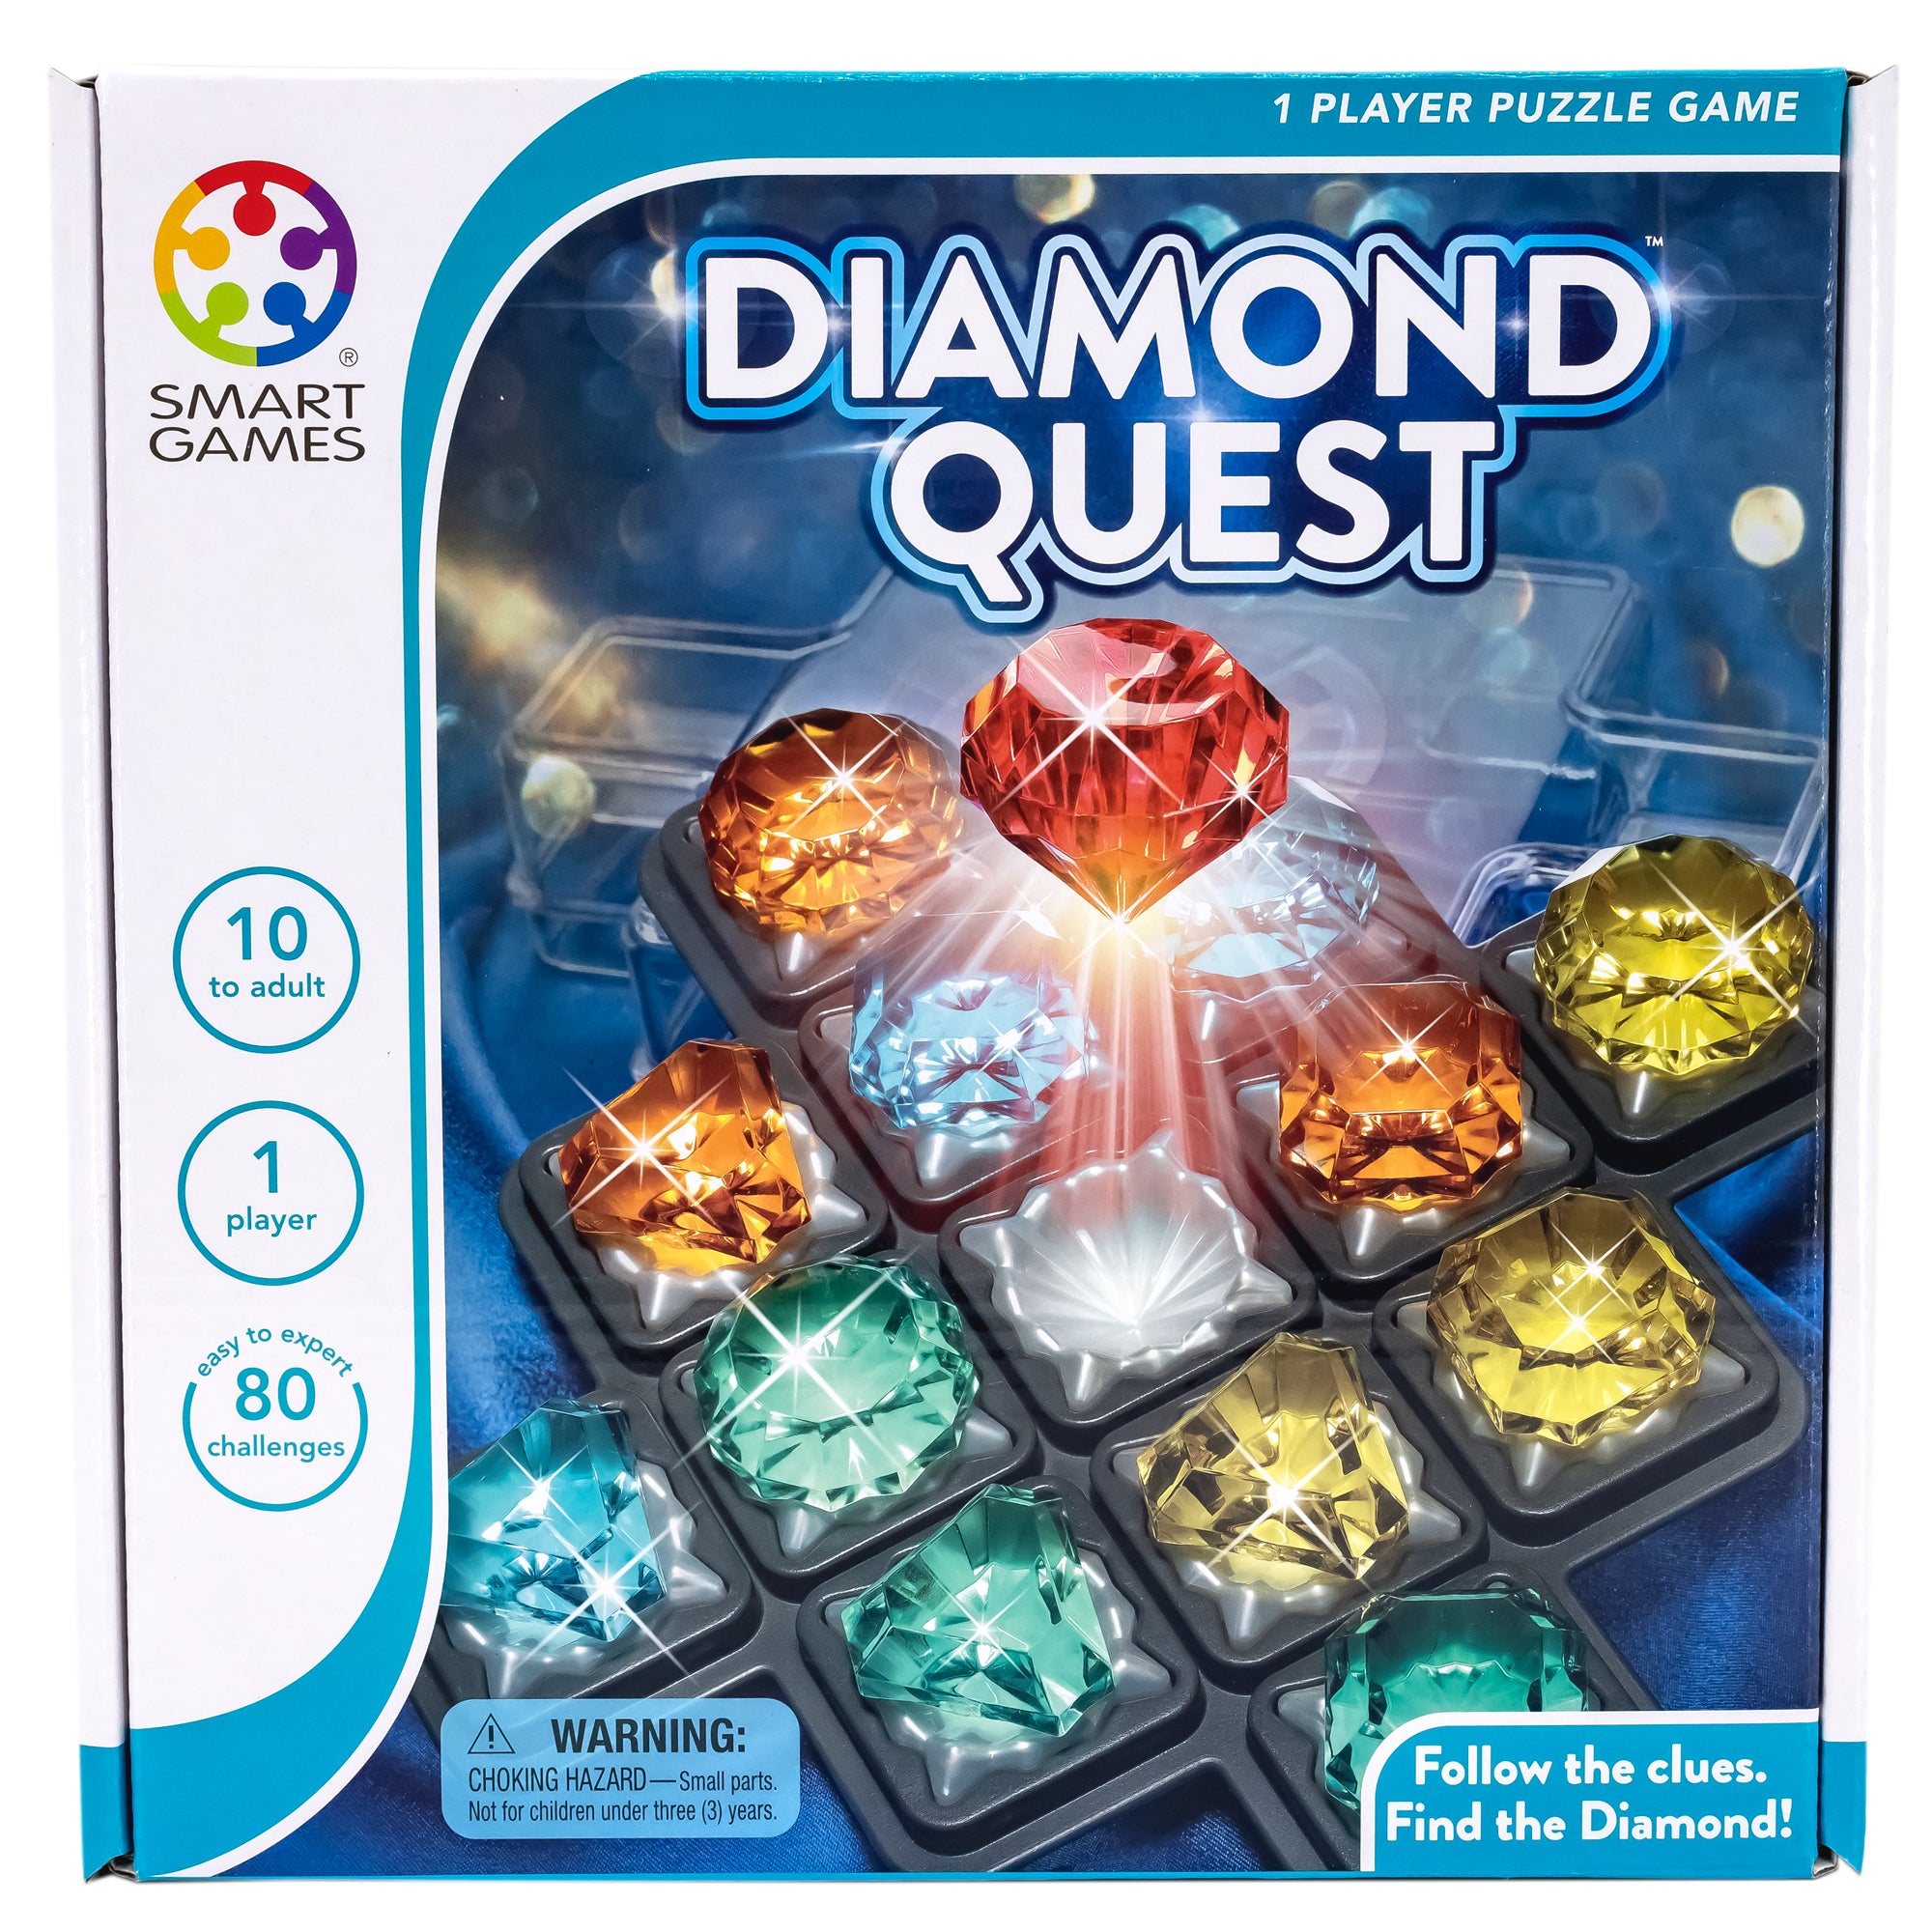 The Diamond Quest Smart Game box cover showing the game board with the gem pieces all in place. One red gem in the middle is elevated above the board with shining starbursts coming from the piece. The box indicates the game is 1-player and recommended for ages 10 and older. There are 80 challenges.